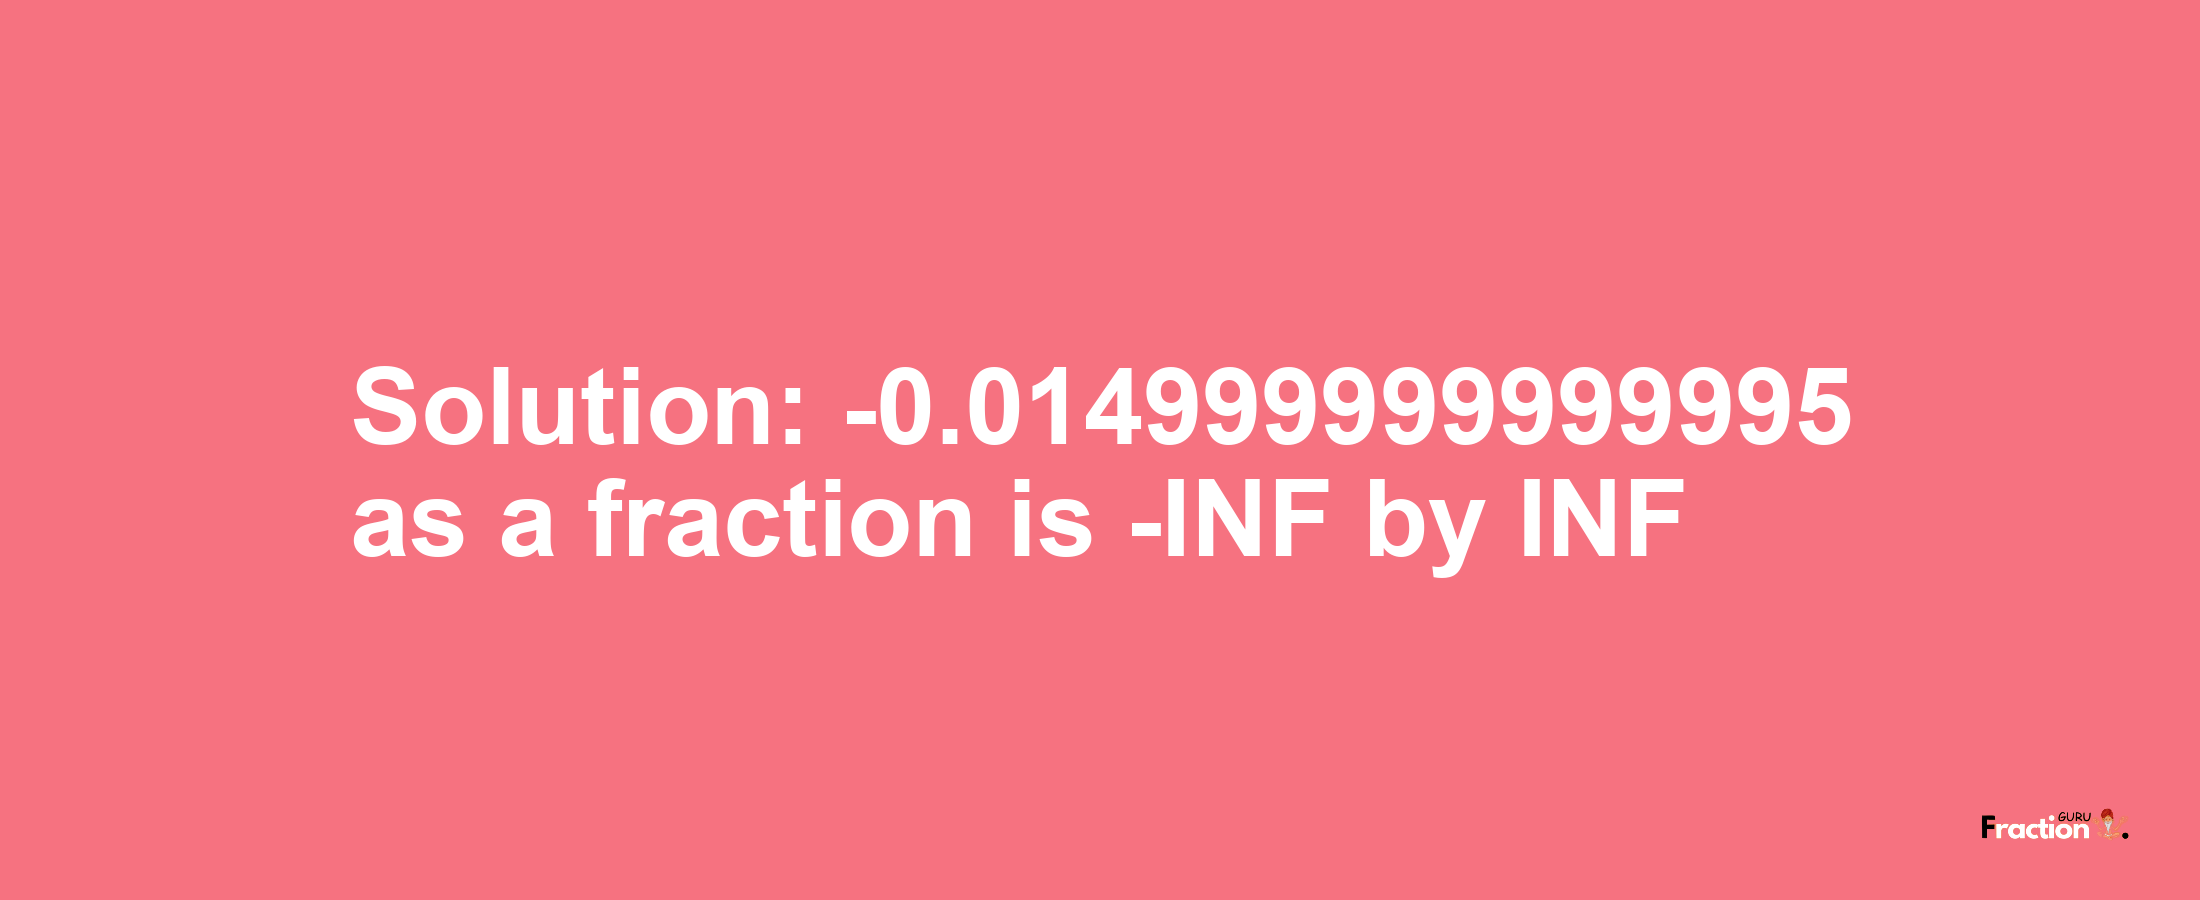 Solution:-0.014999999999995 as a fraction is -INF/INF